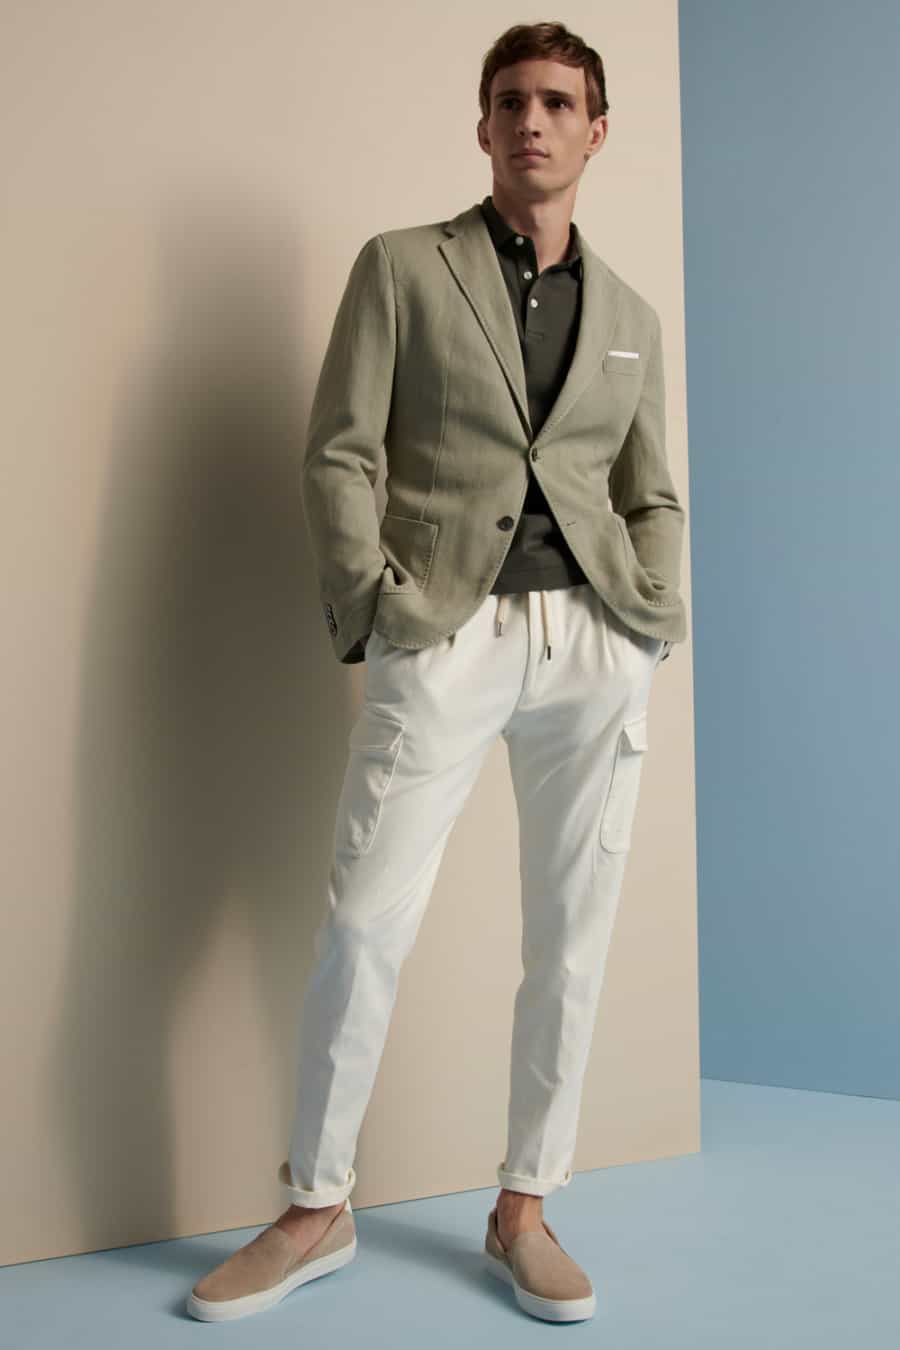 Men's white cargo pants, dark green polo shirt, light green blazer and suede loafers outfit